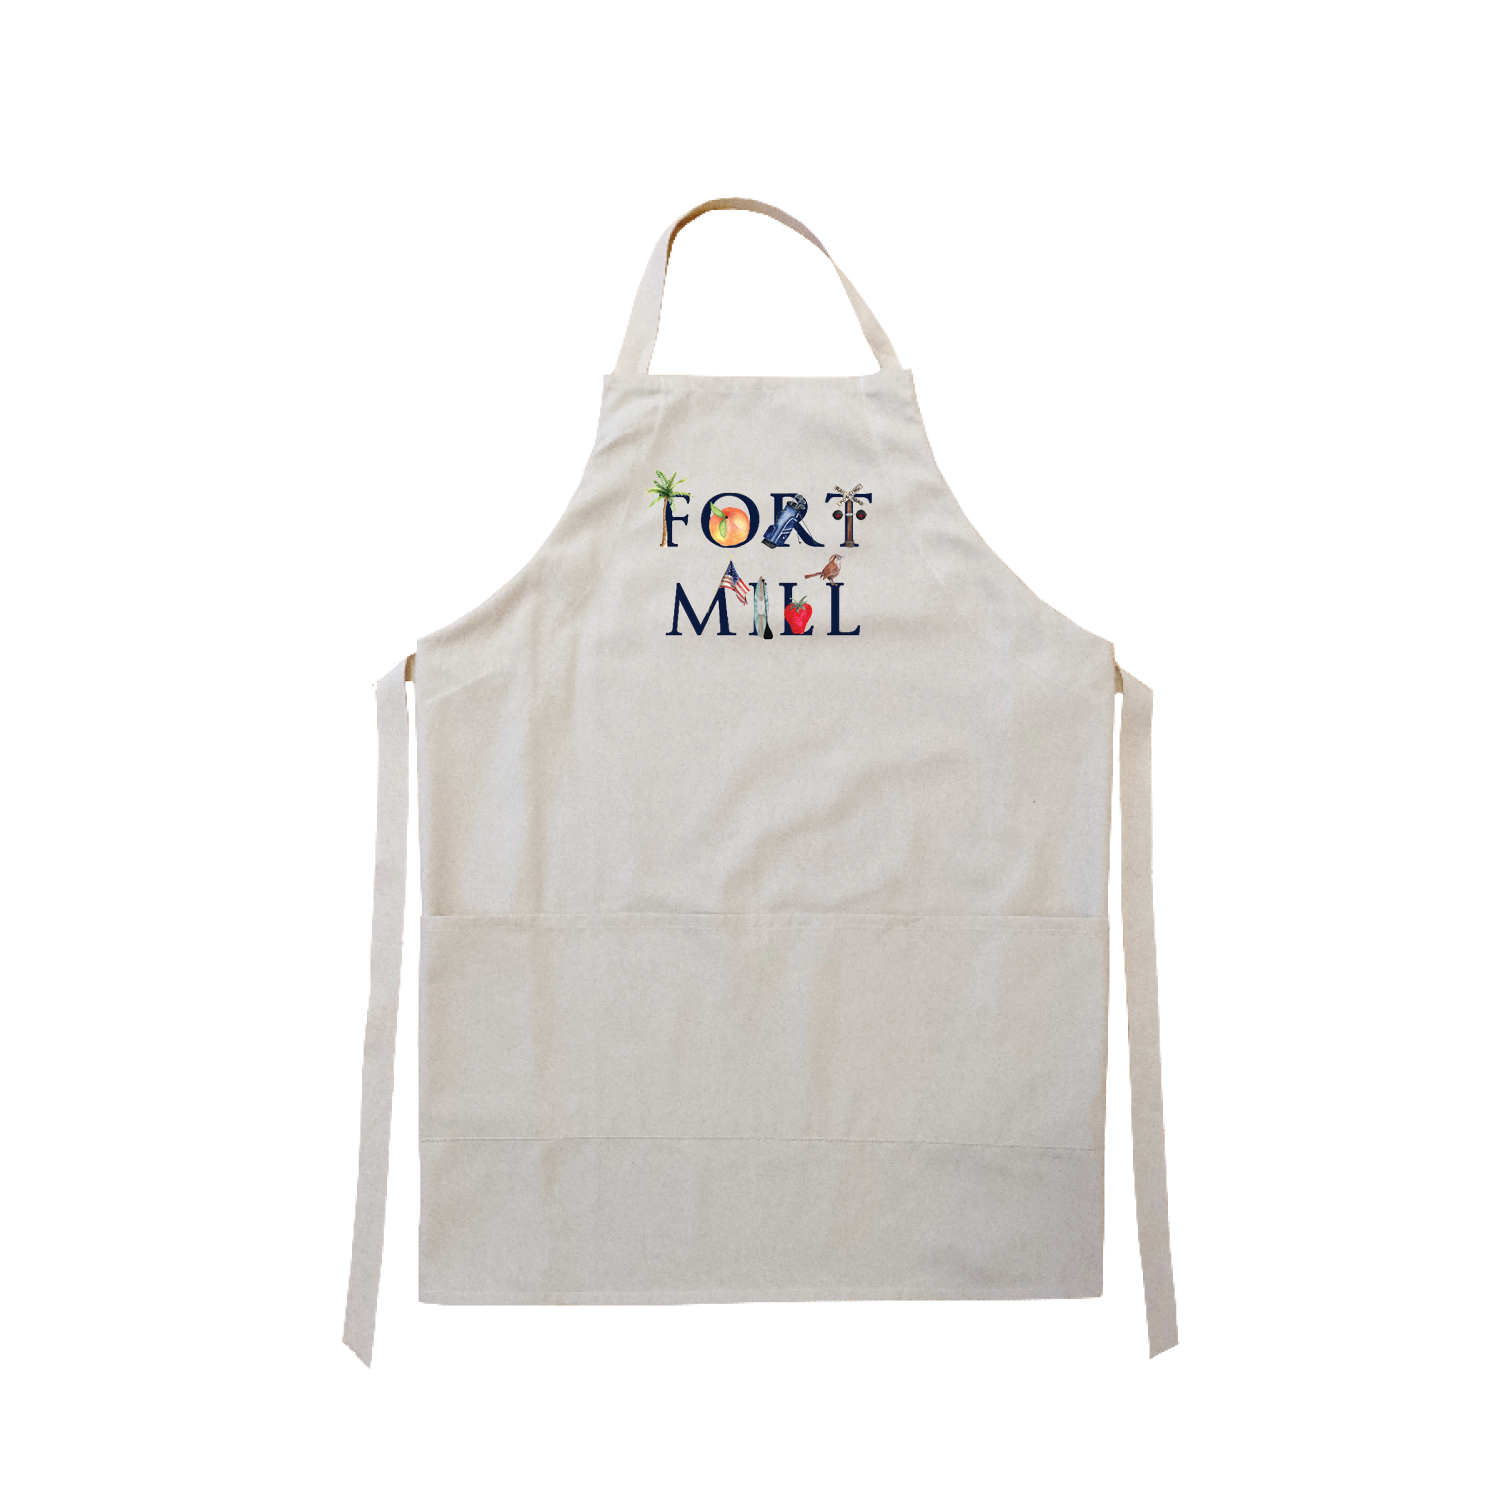 fort mill apron